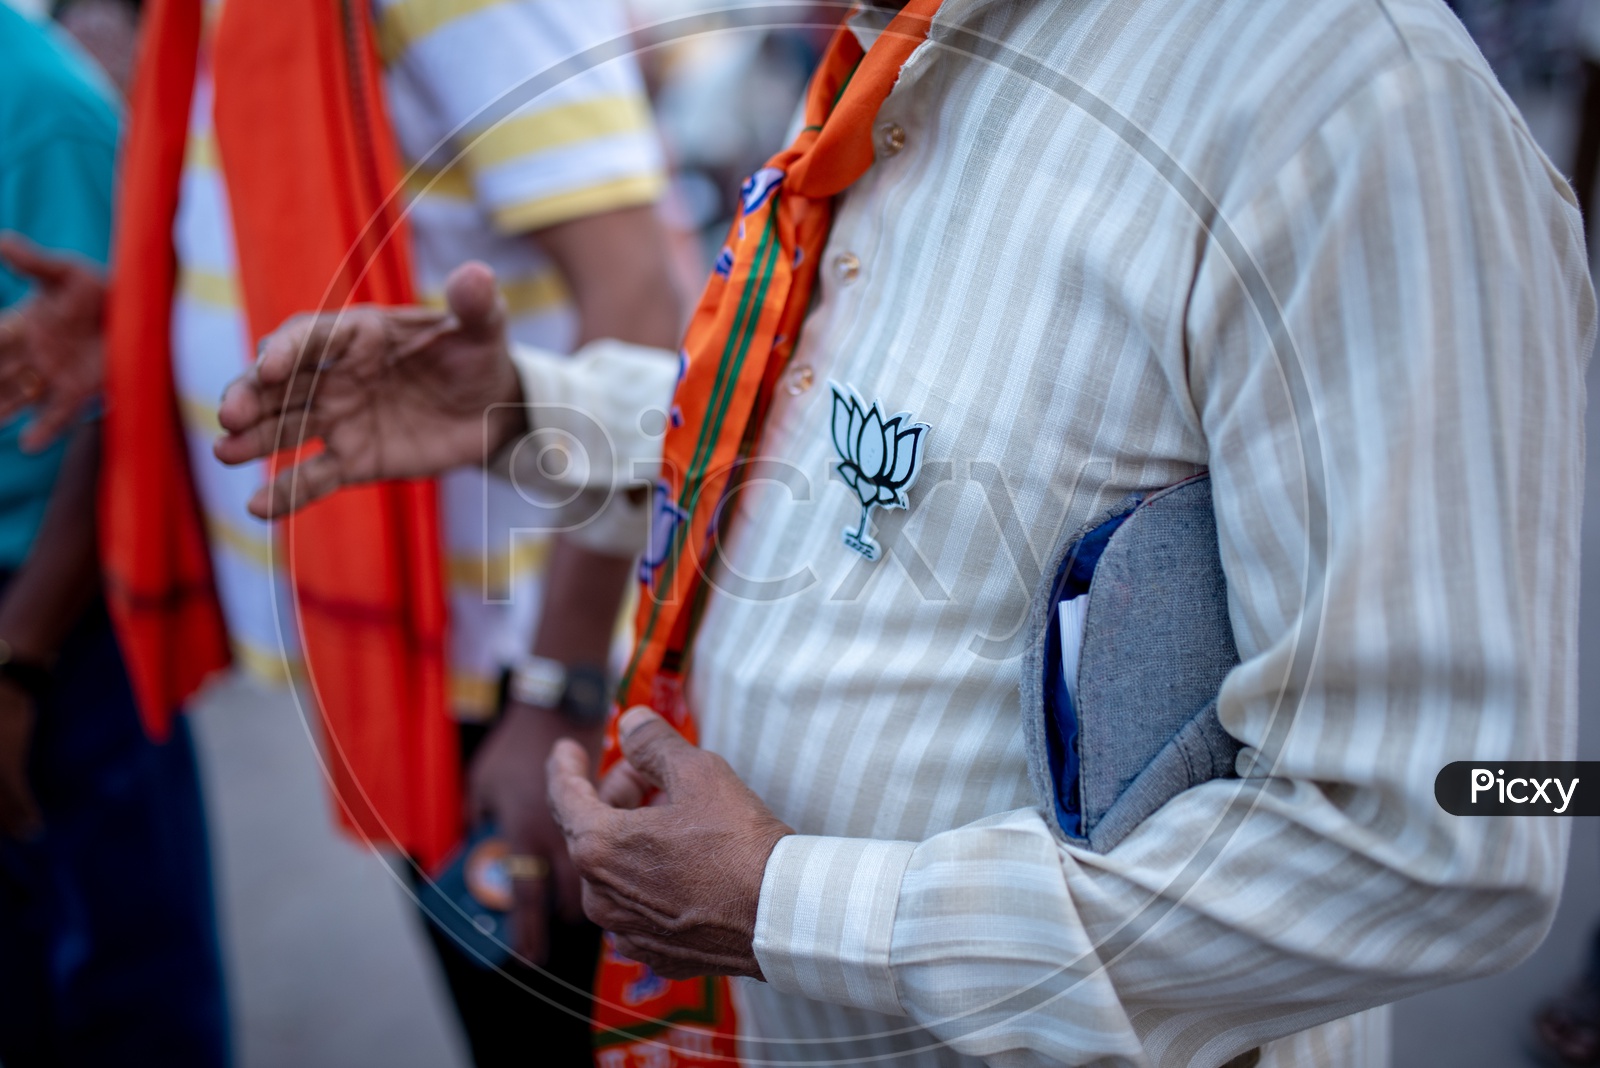 Modi Supporters Wearing BJP Party Flags And Lotus Symbol Badges During The Election Campaign For Lak Sabha General Elections 2019